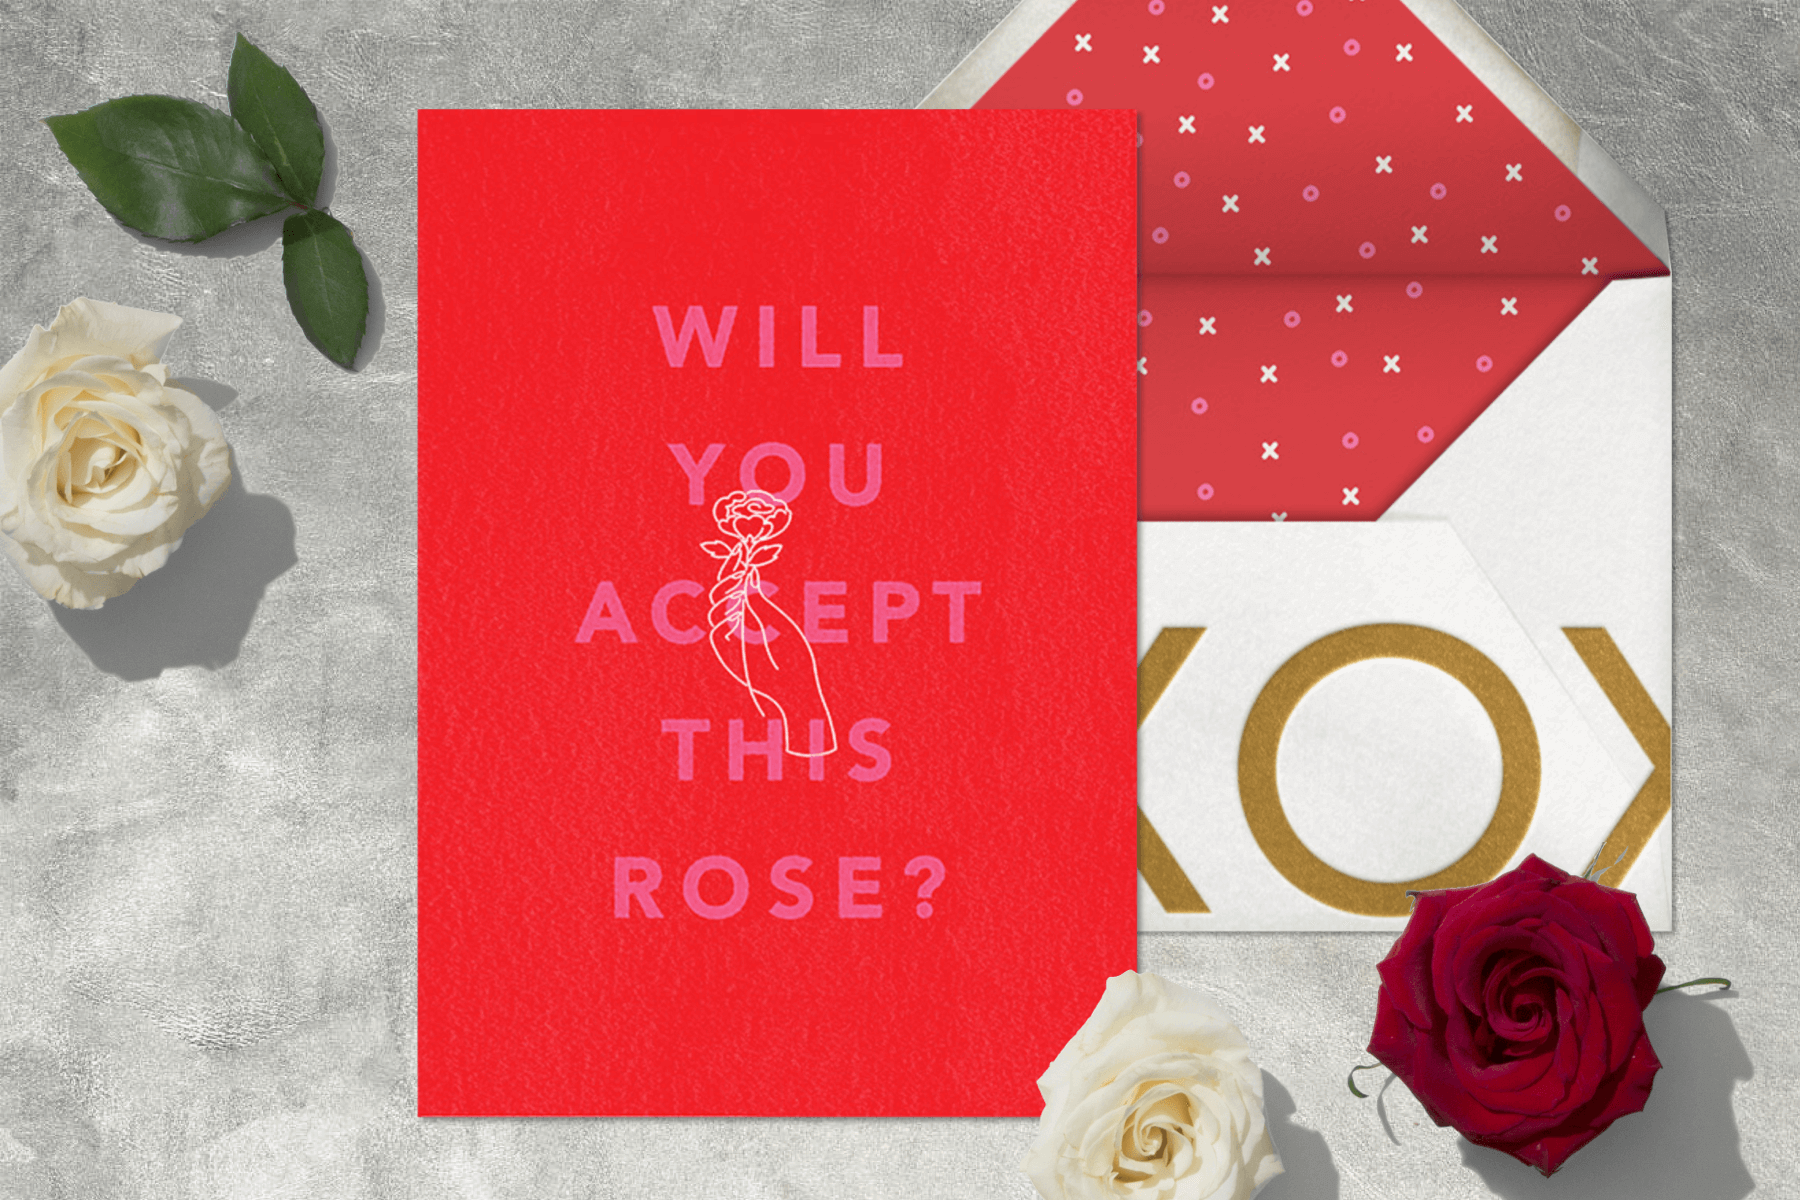 A red Valentine’s Day card featuring a hand holding a rose.